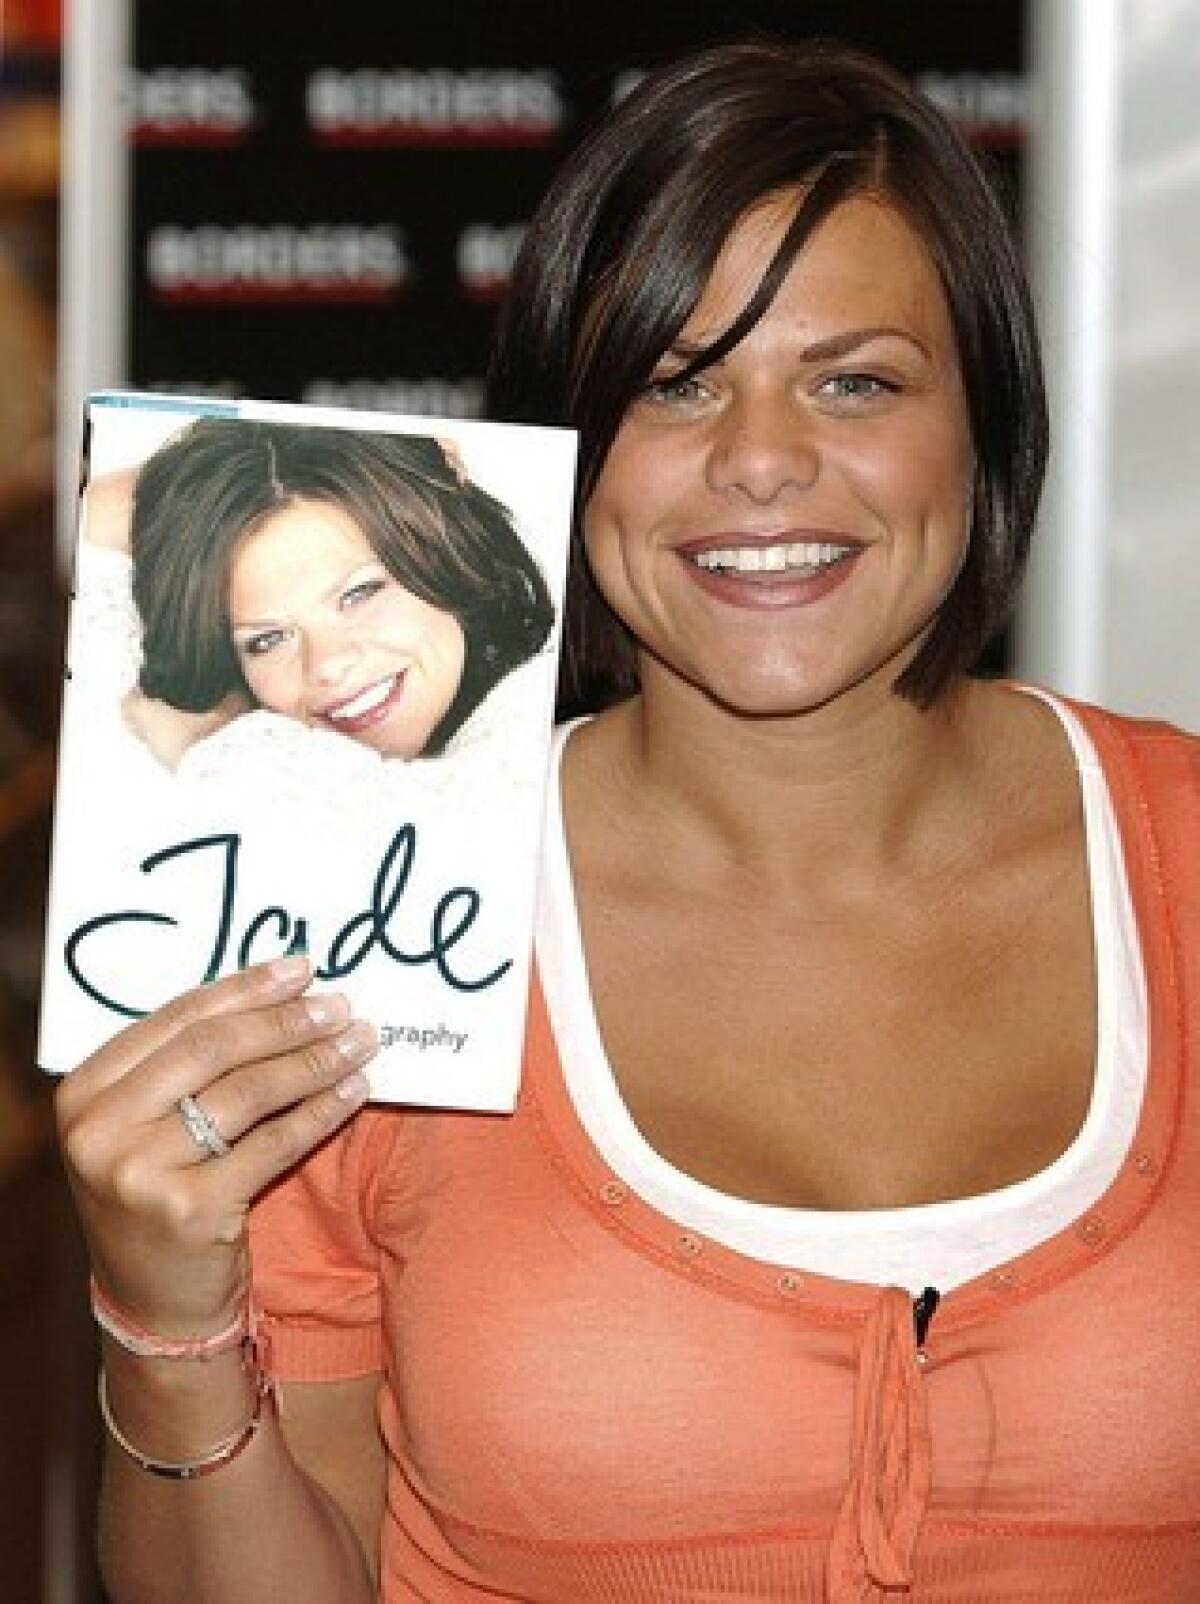 Jade Goody was a contestant on the show "Big Brother," gaining a reputation for going topless, mangling words and shouting at her housemates. She cashed in on her fame by writing an autobiography.